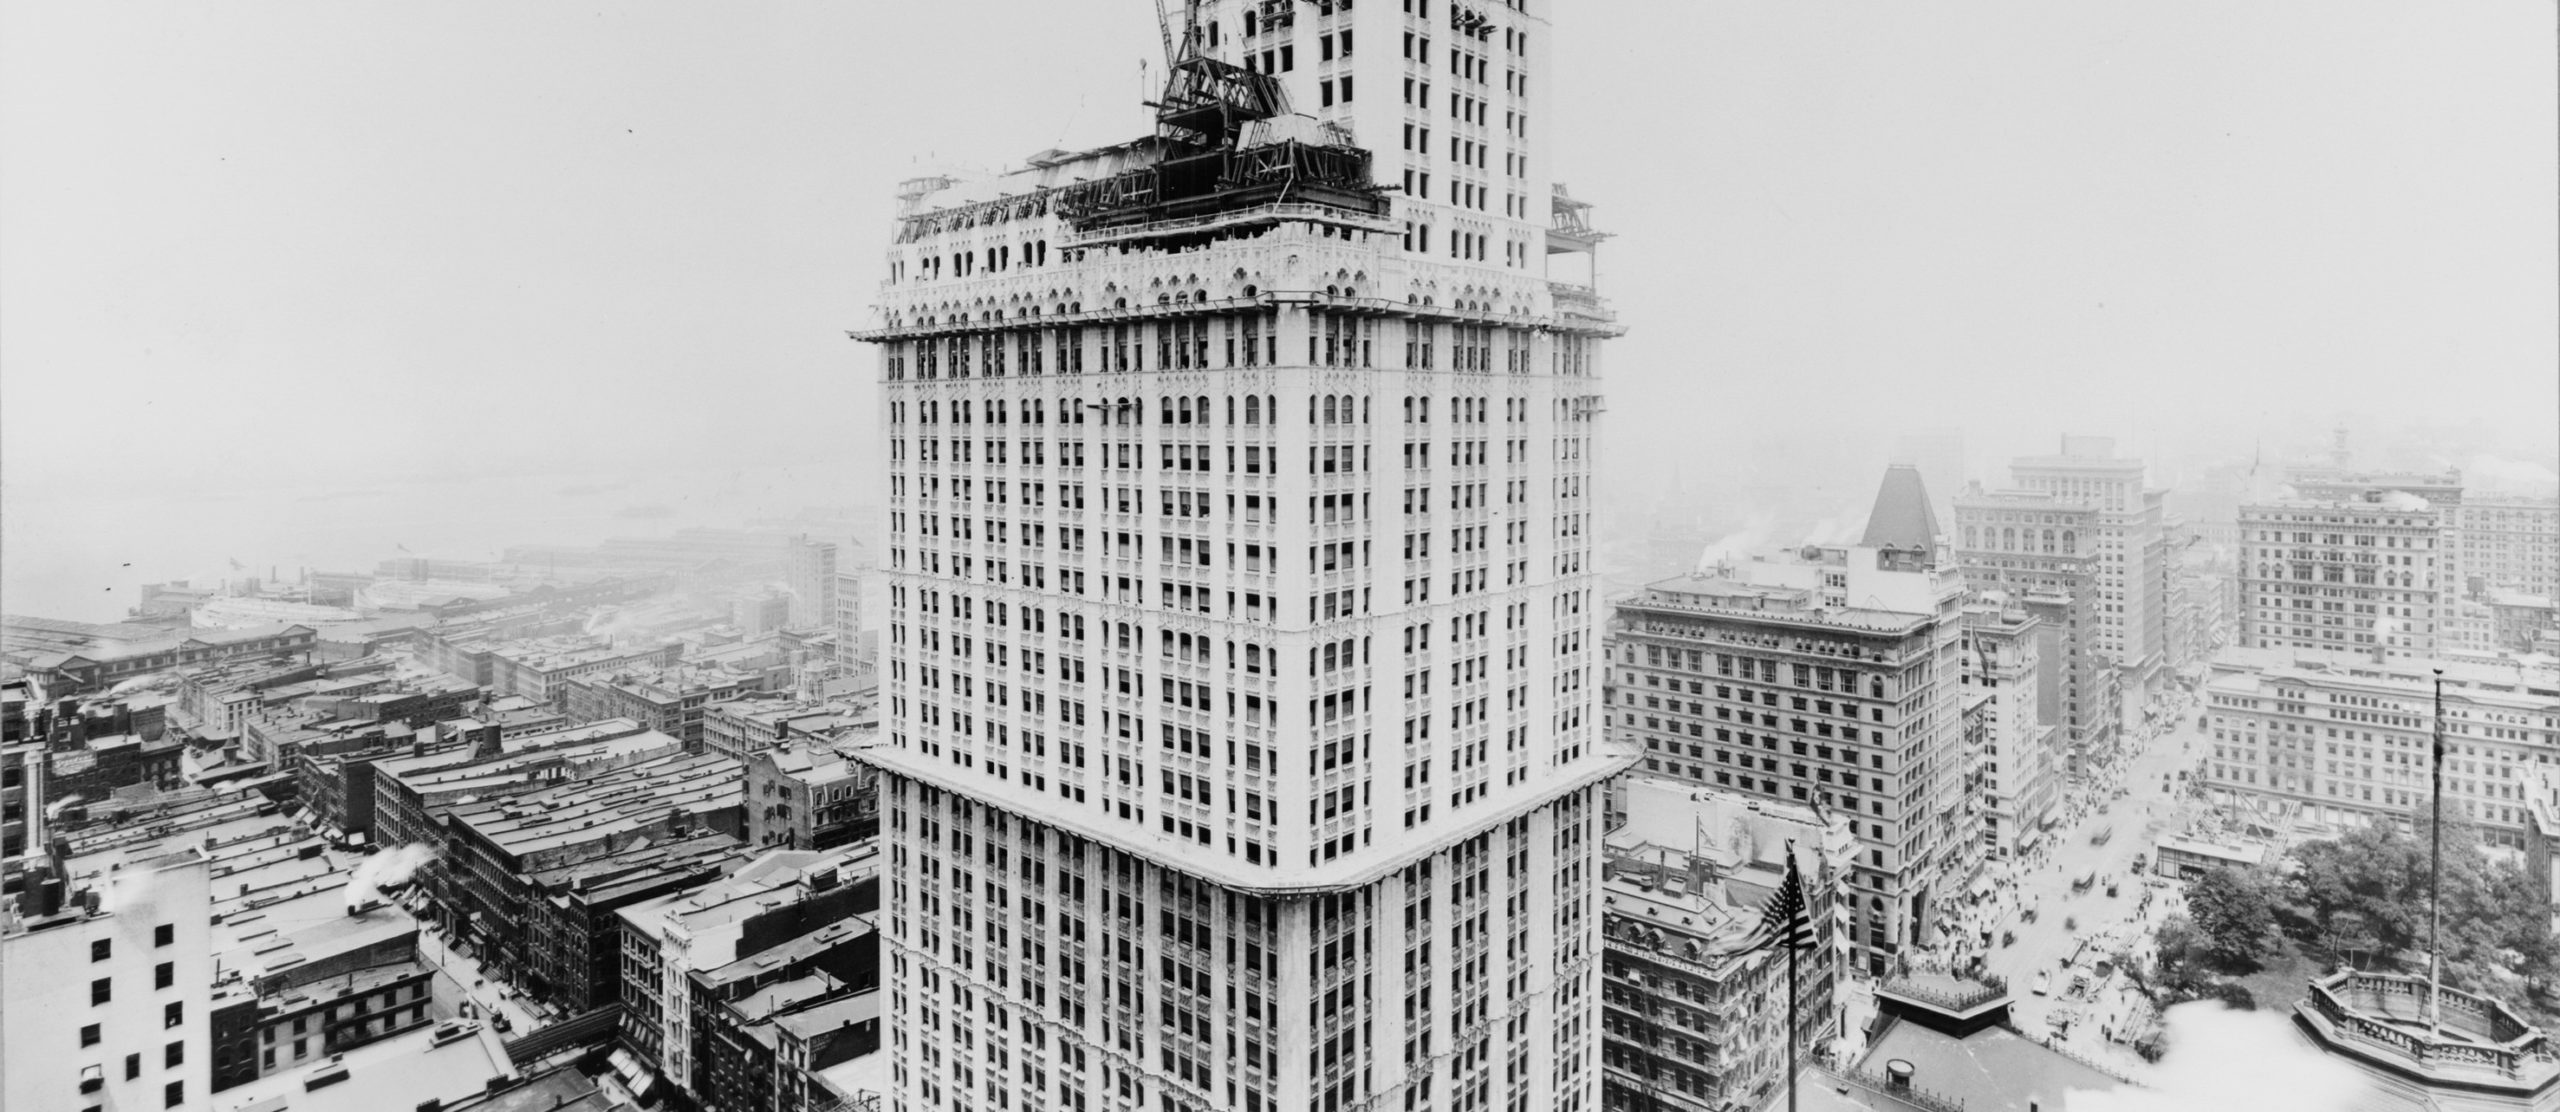 “Inventing the Skyline”: the career of Cass Gilbert